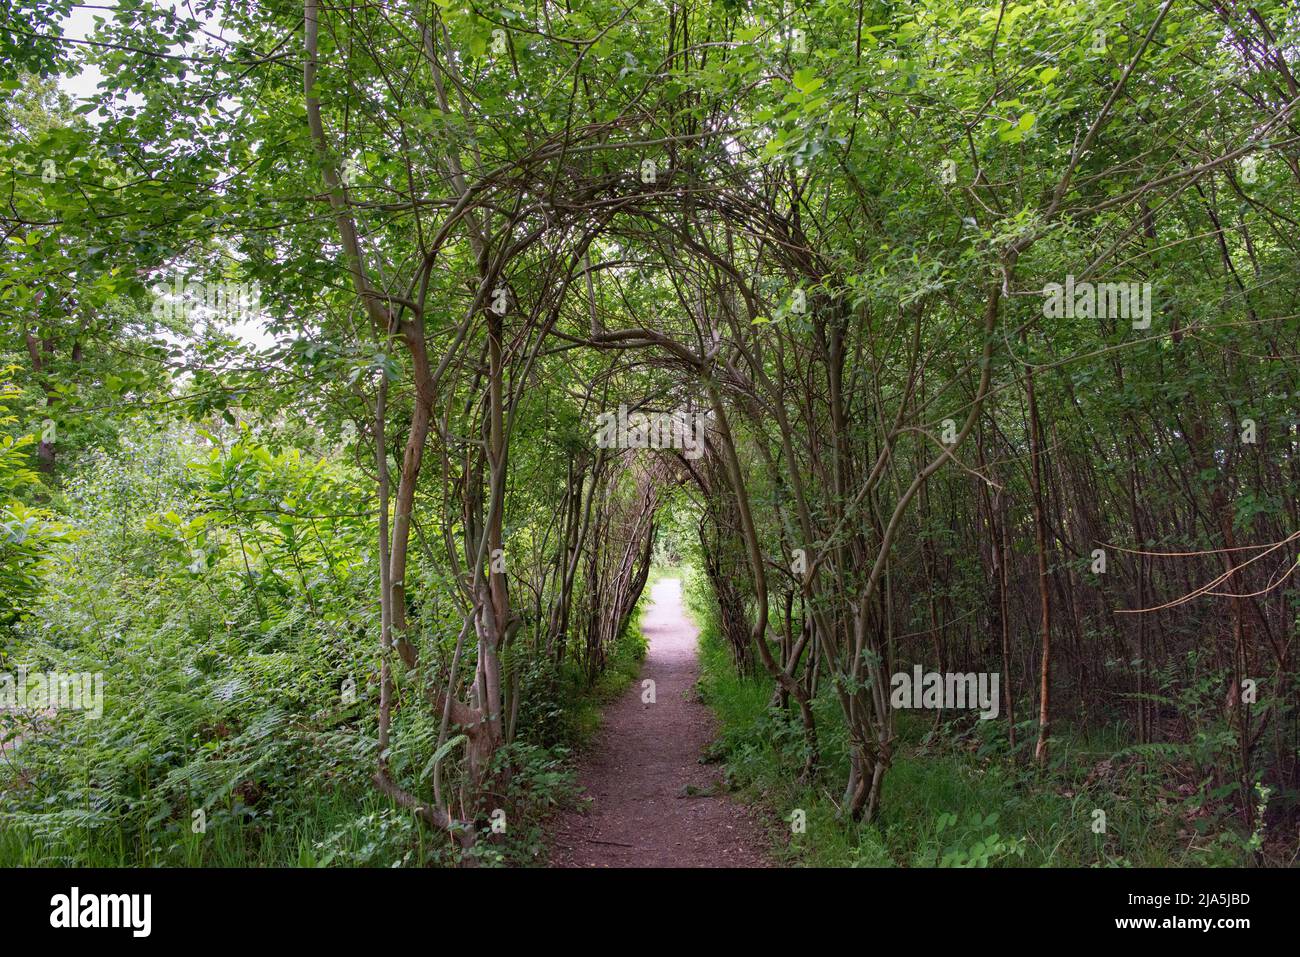 The Willow walkway on the Art Trail at West Blean Woods, Kent, UK Stock Photo